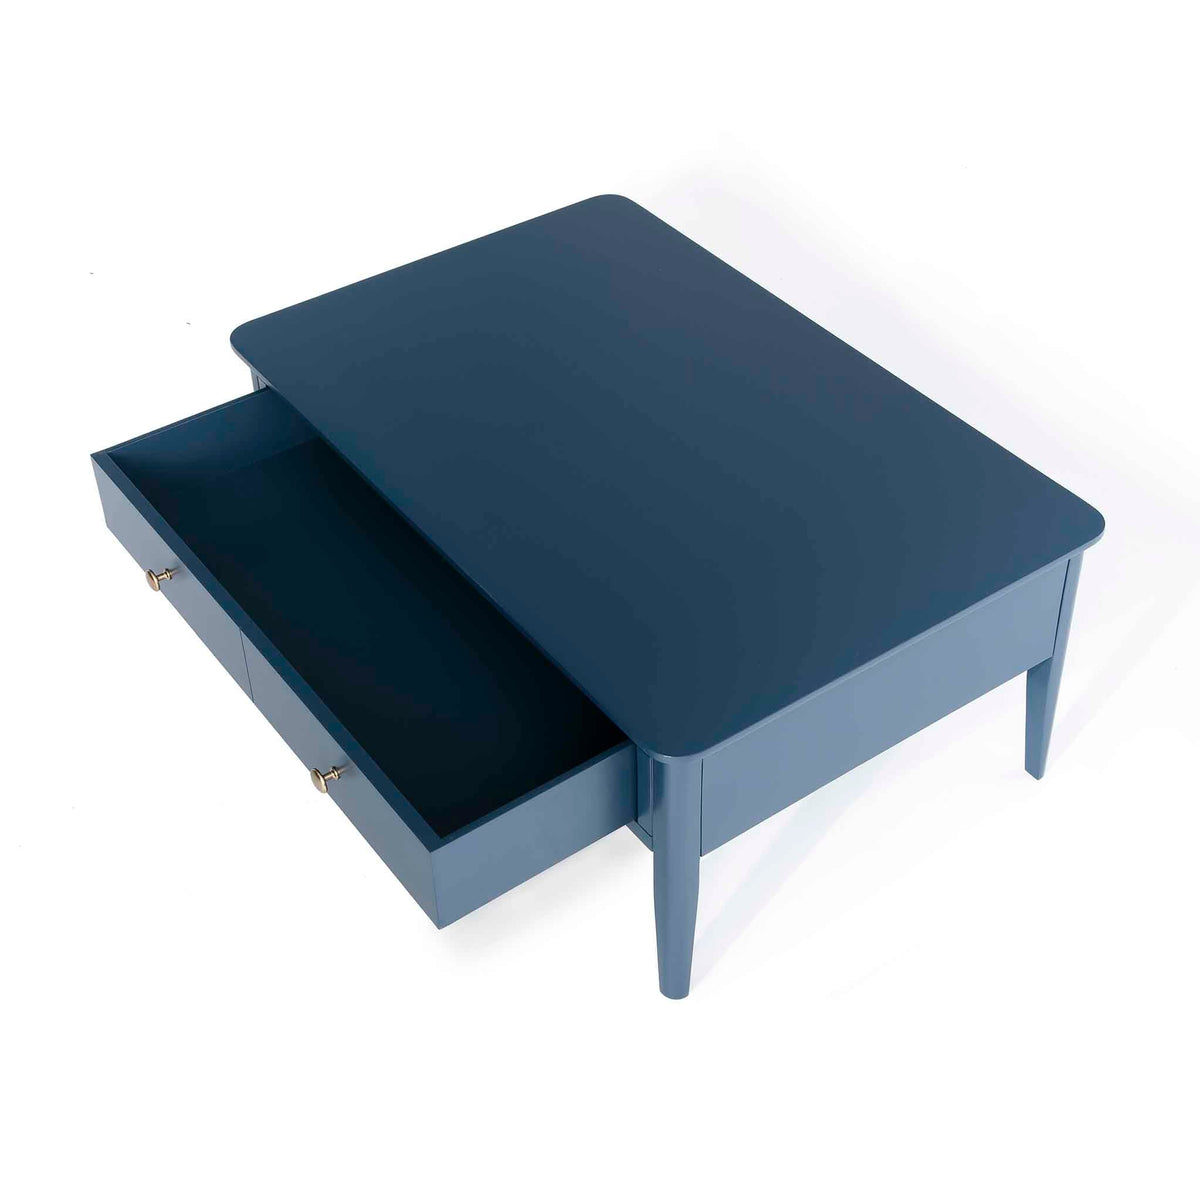 Stirling Blue Coffee Table - Top view with drawer open